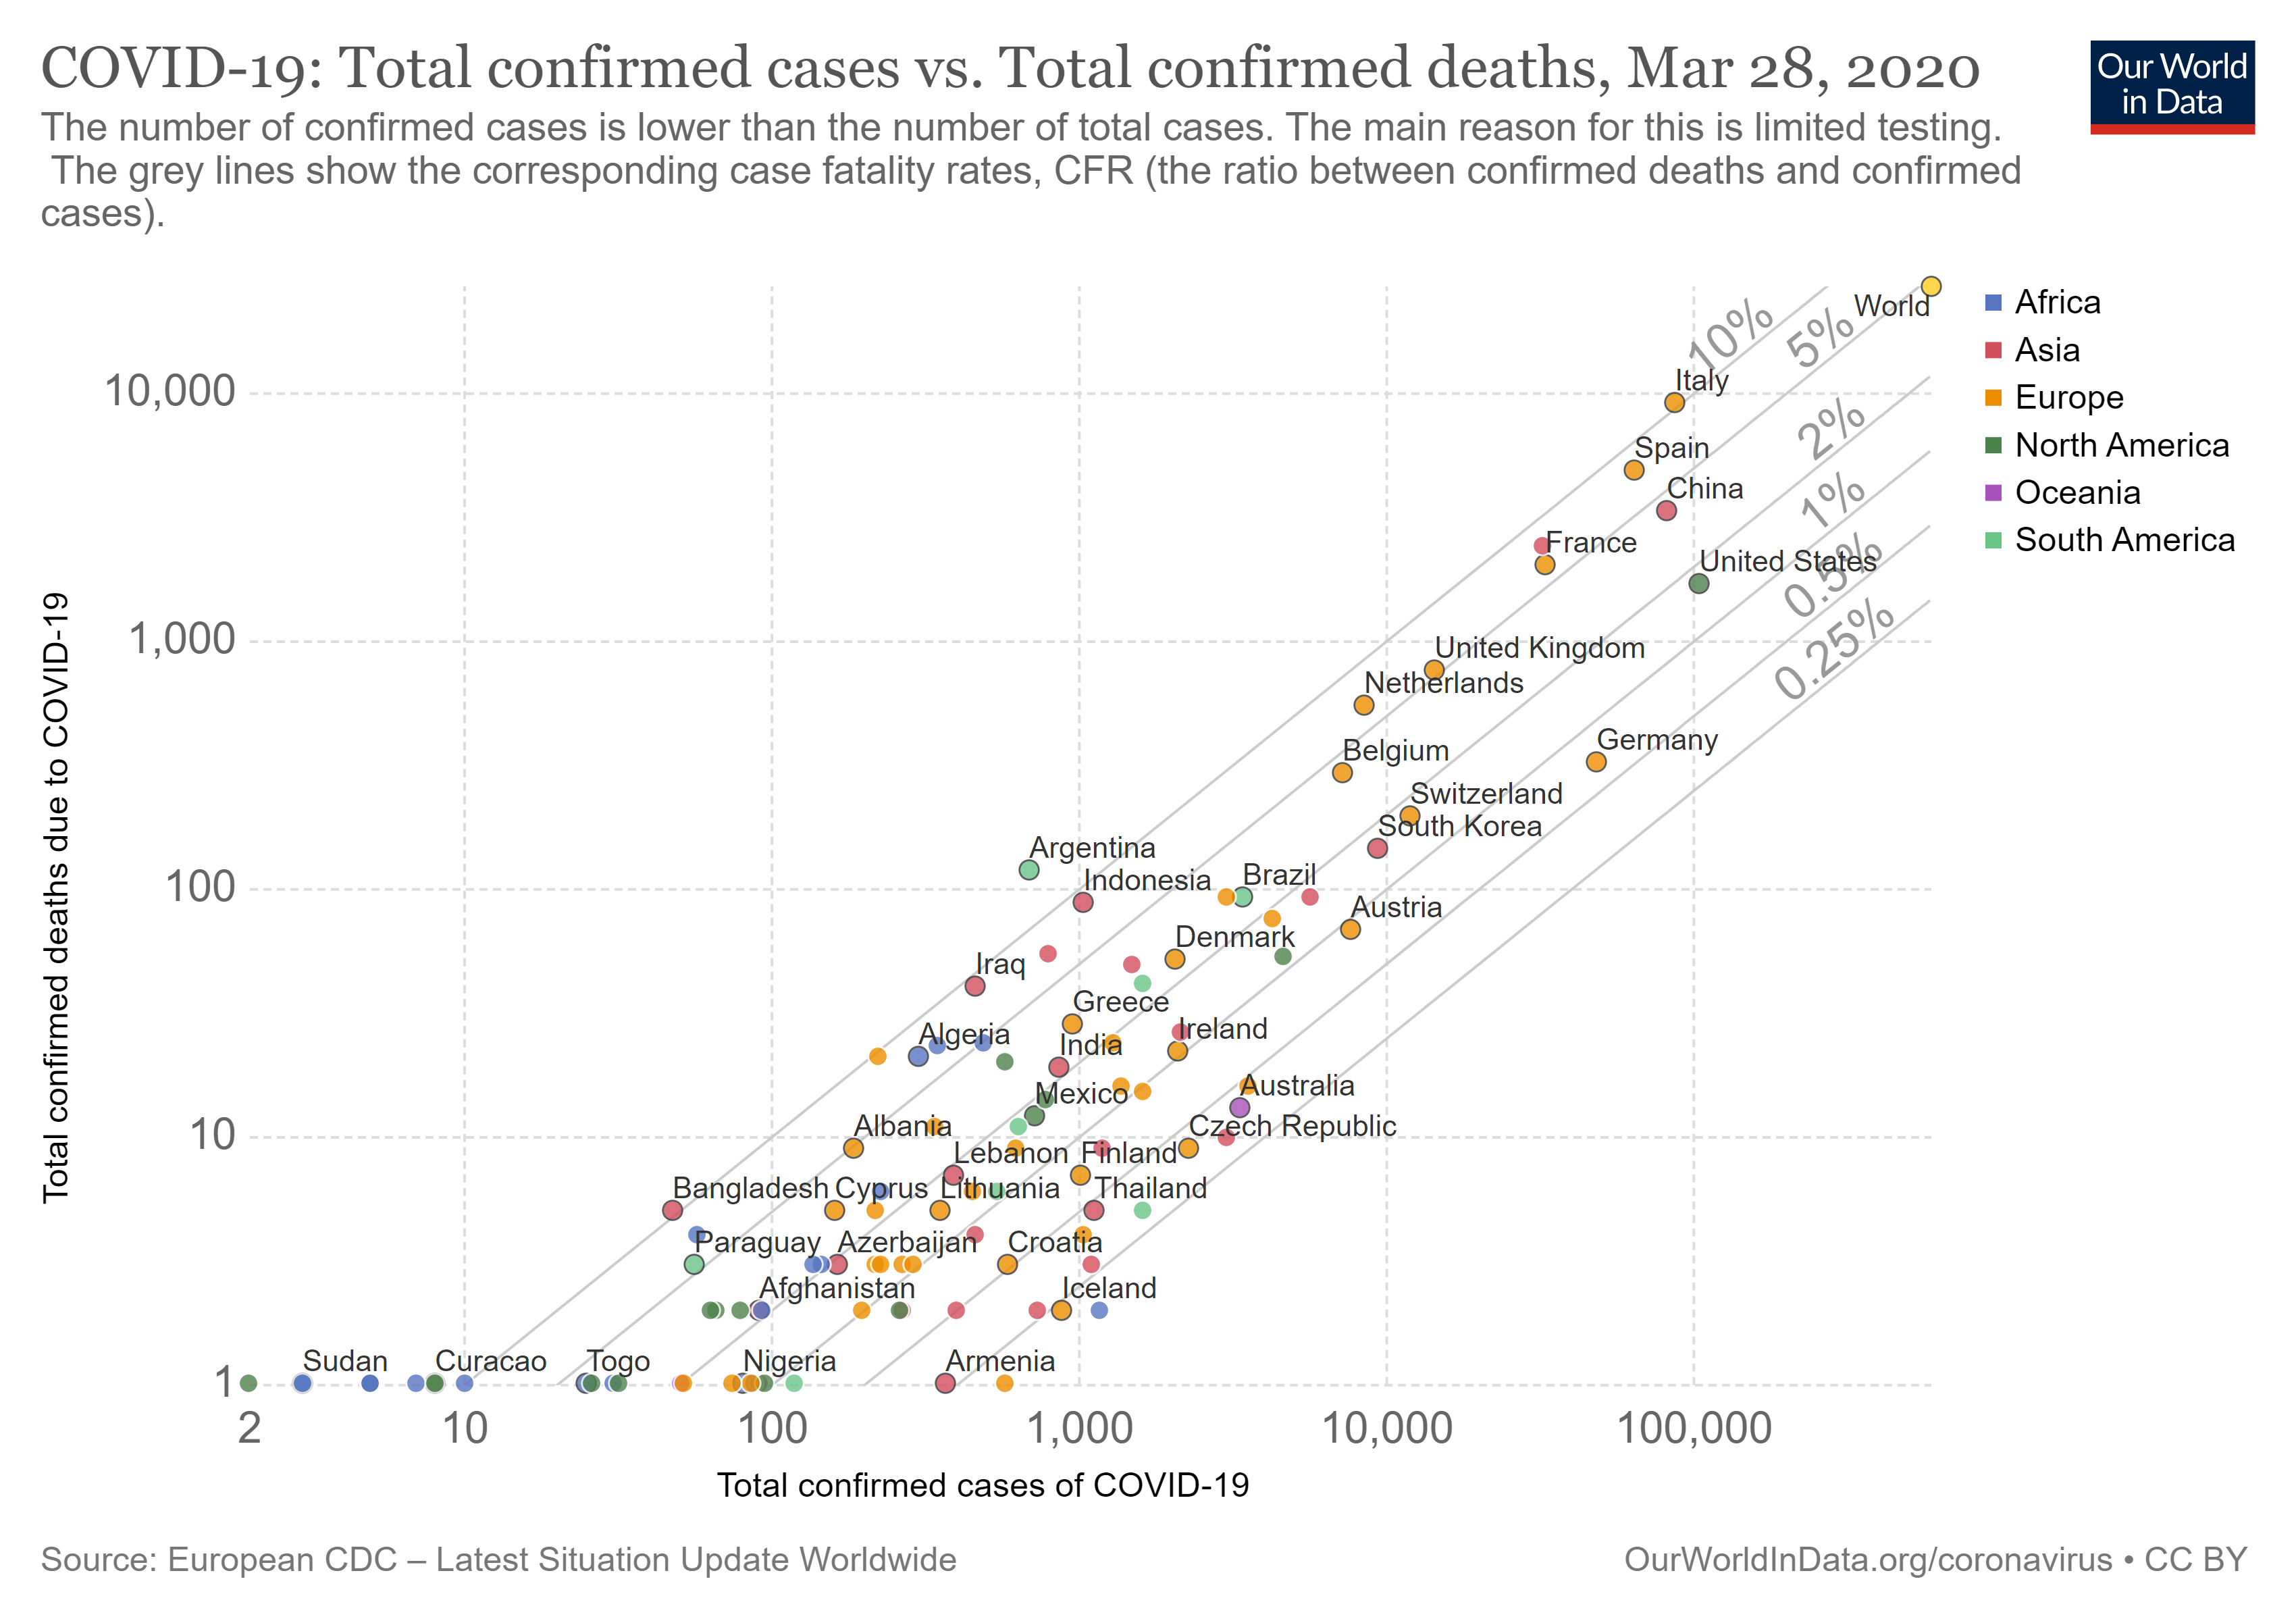 COVID-19 case fatality rate by country and number of confirmed cases March 27, 2020